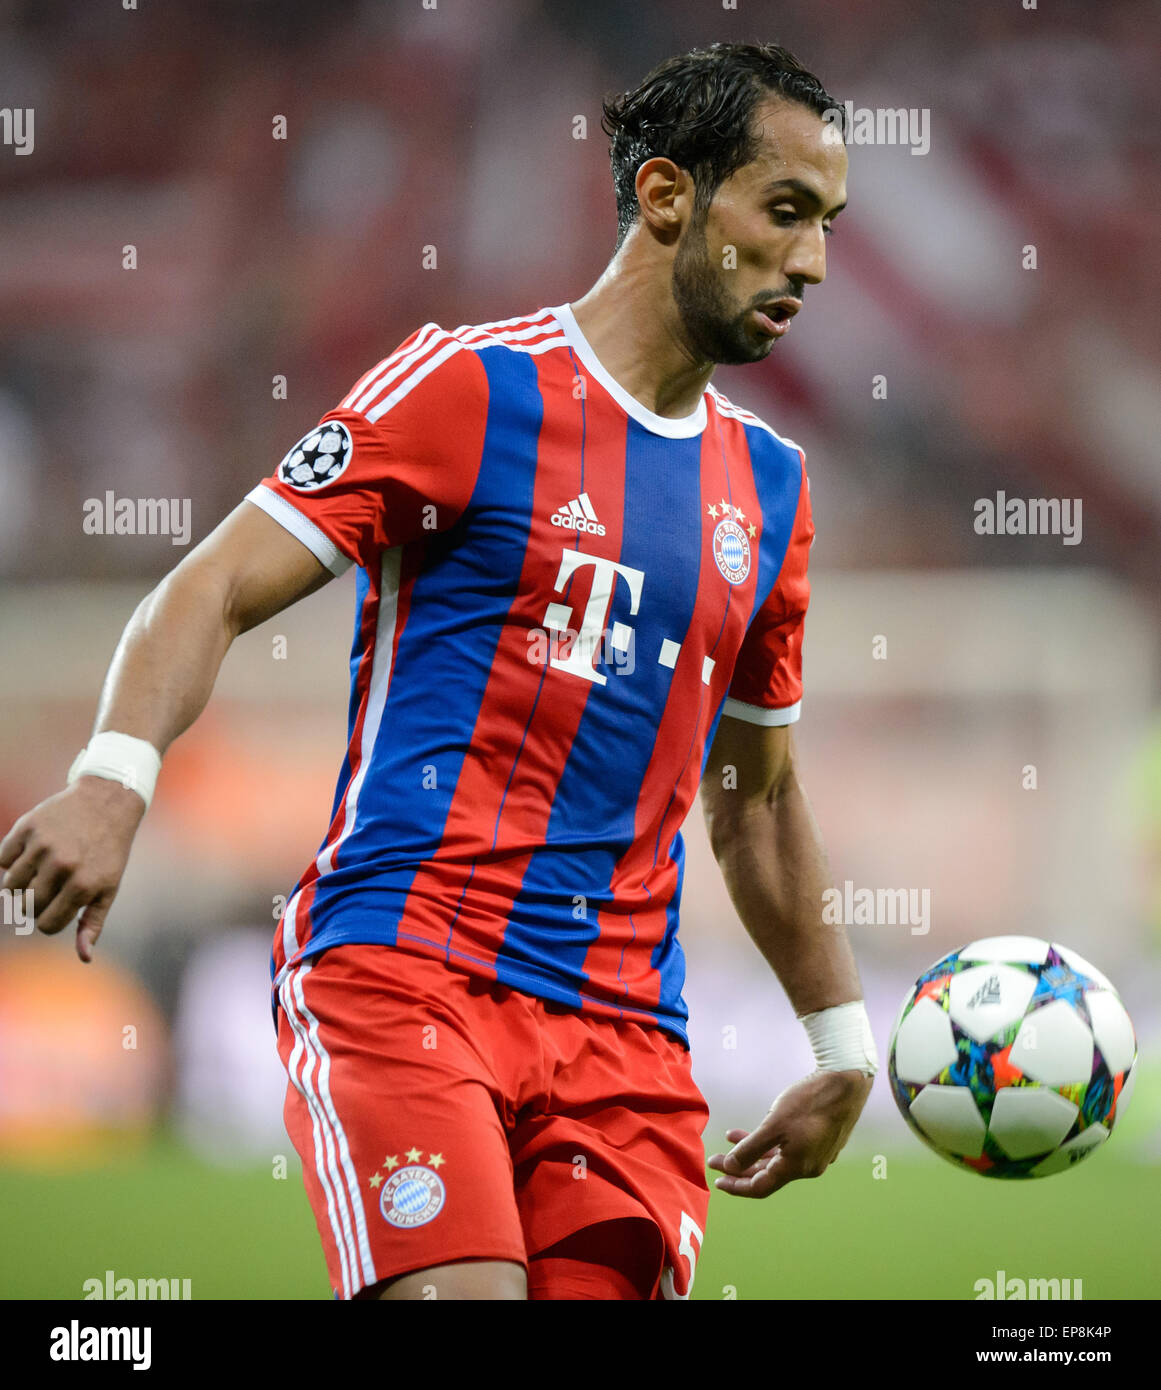 Munich's Medhi Benatia in action during the Champions League semi final match between FC Bayern Munich and FC Barcelona at Allianz Arena in Munich, Germany, 12 May 2015. Photo: Thomas Eisenhuth/dpa - NO WIRE SERVICE - Stock Photo